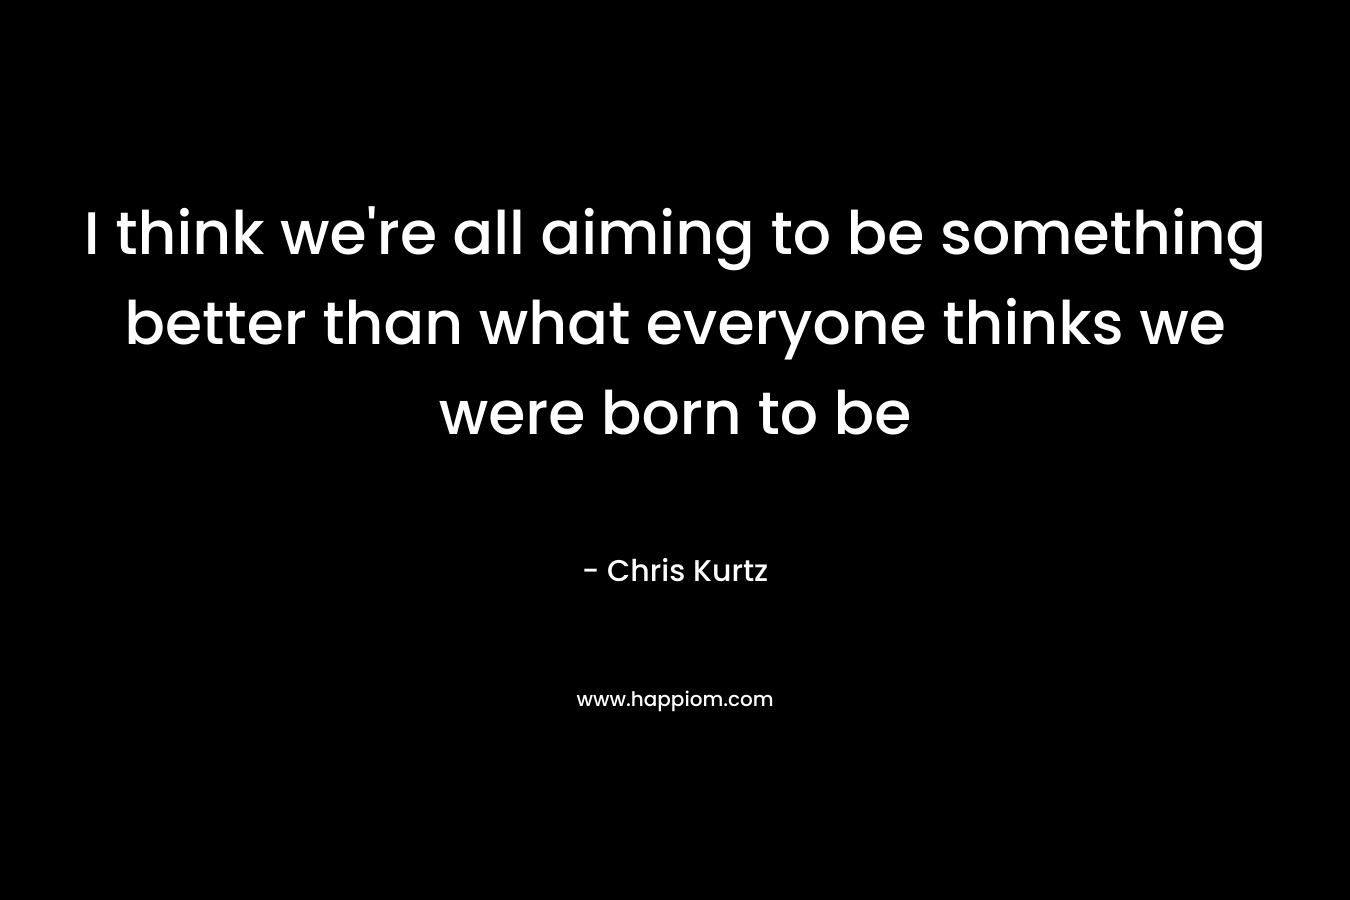 I think we're all aiming to be something better than what everyone thinks we were born to be